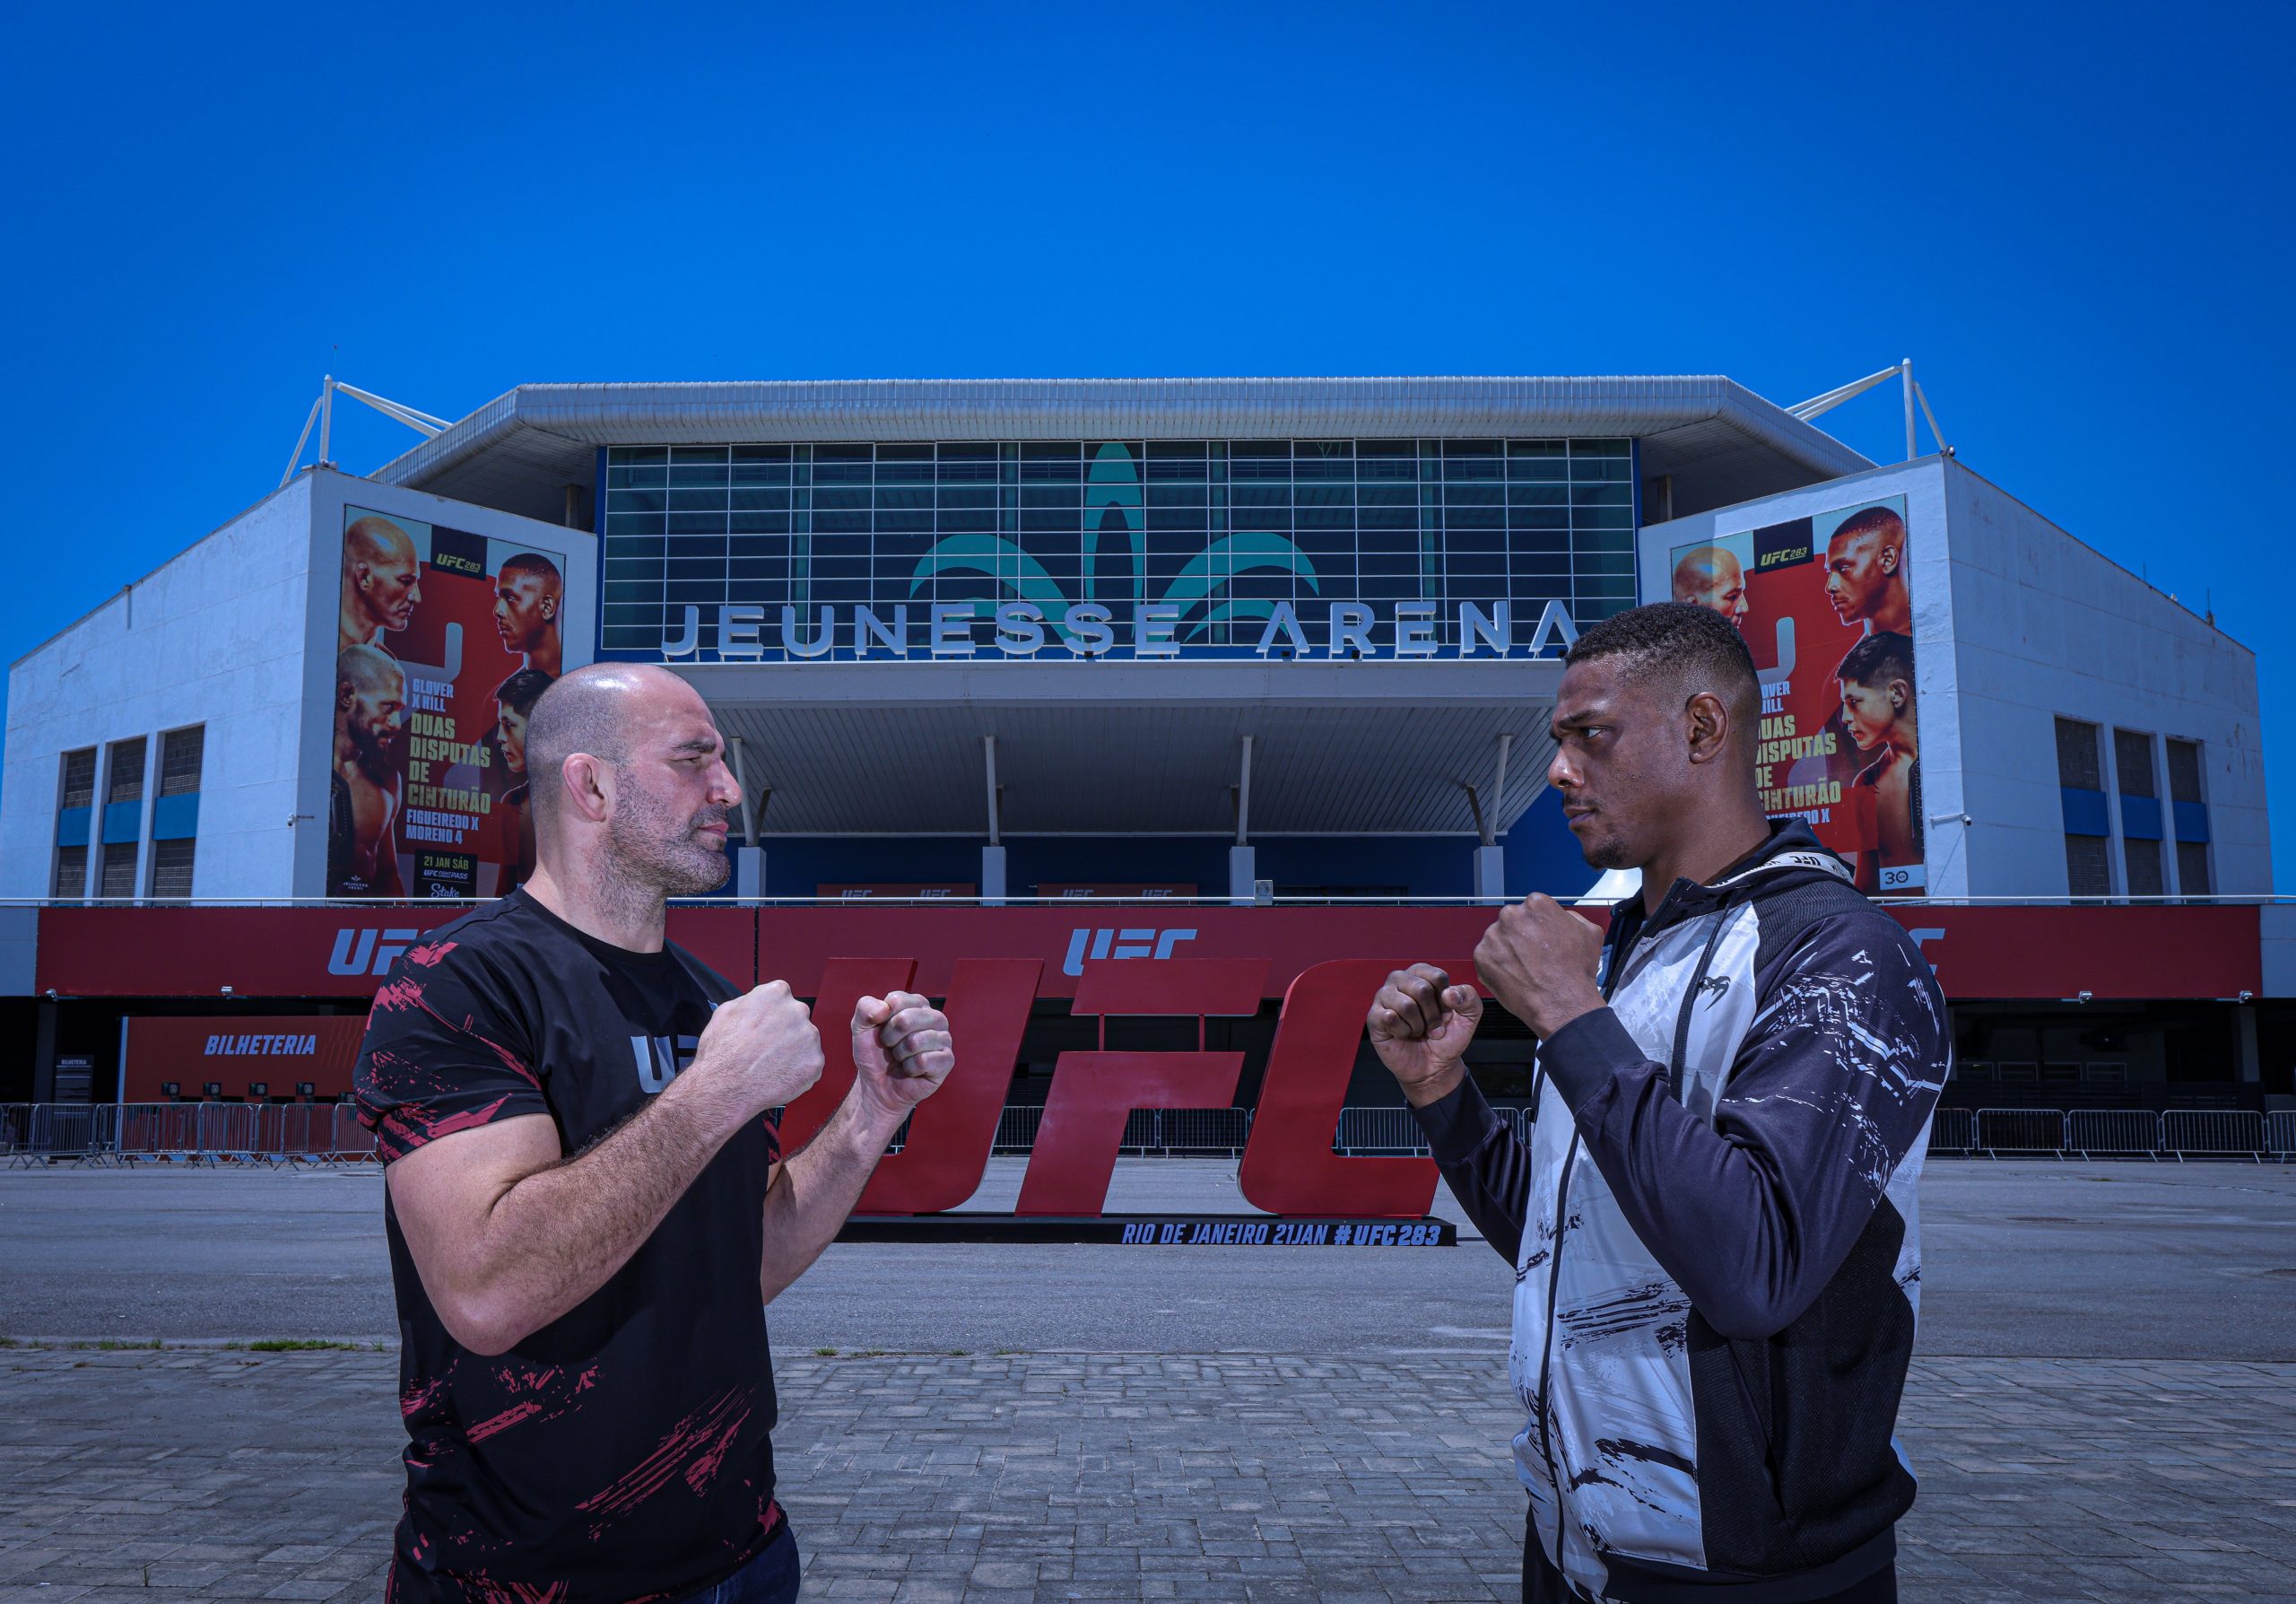 UFC 283 location: Everything you need to know about Brazil's Jeunesse Arena